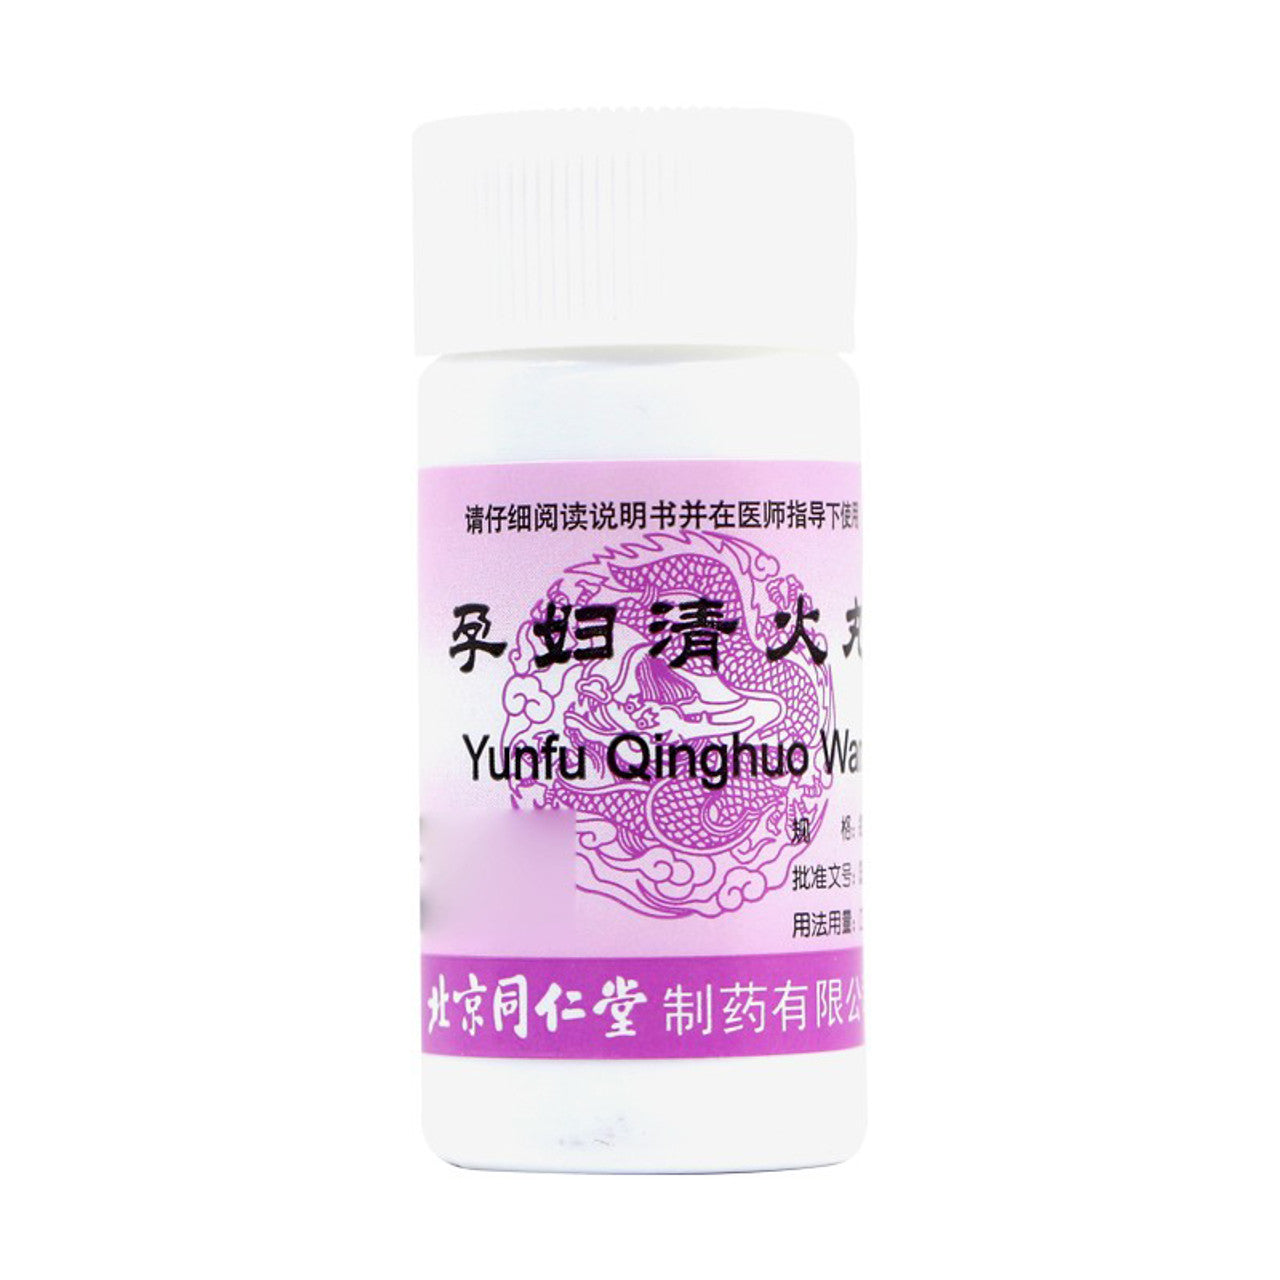 China Herb. Brand Tongrentang. Yunfu Qinghuo Wan or Yun Fu Qing Huo Wan or Yunfu Qinghuo Pills for pregnant women with fetal heat, dry mouth, burning chest and abdomen, or sore mouth and tongue, dry throat, or constipation, yellow and red urine.